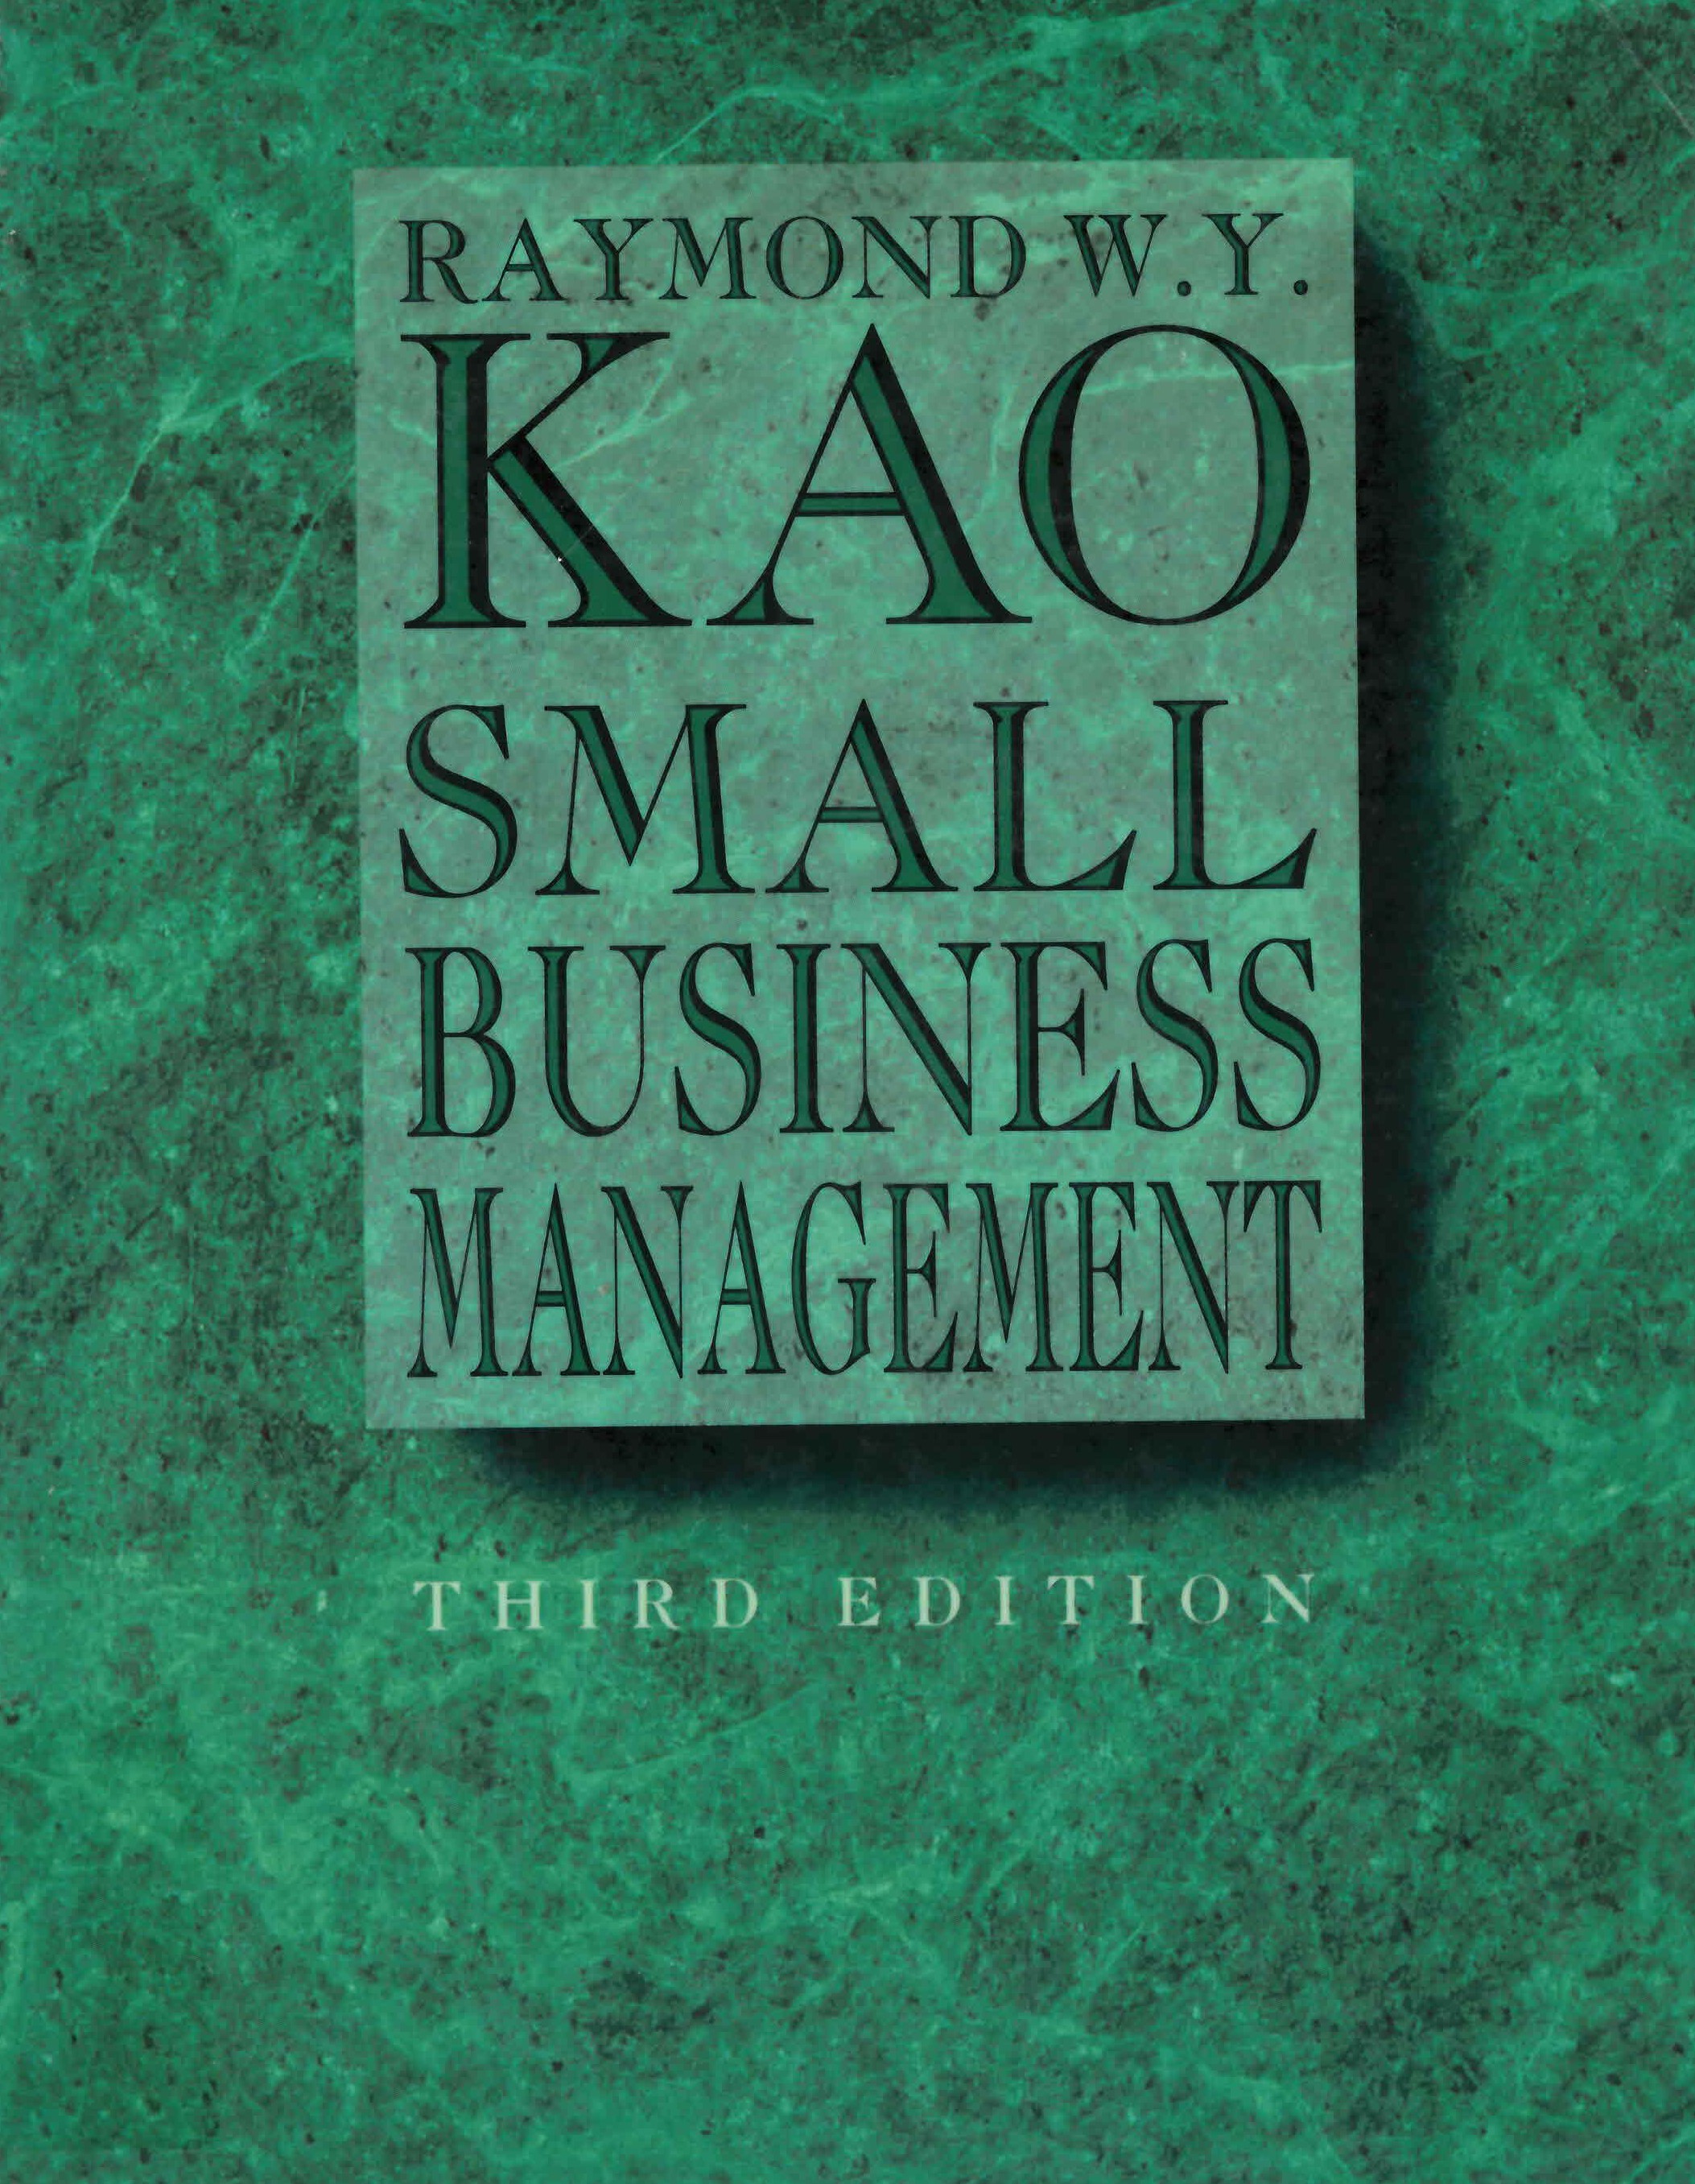 Small business management